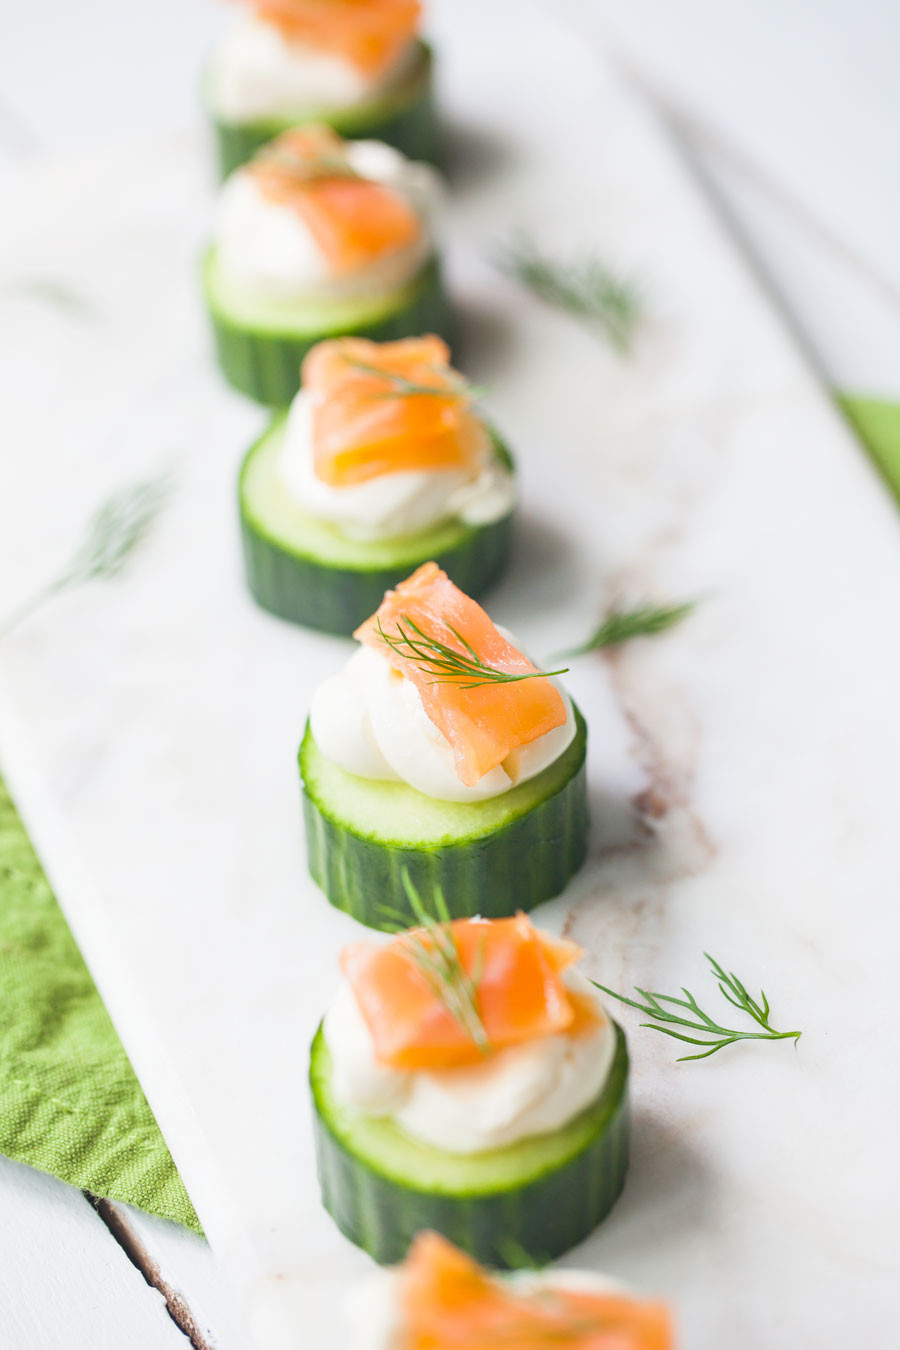 Salmon Appetizers With Cream Cheese
 Cucumber and Smoked Salmon Hors D oeuvres